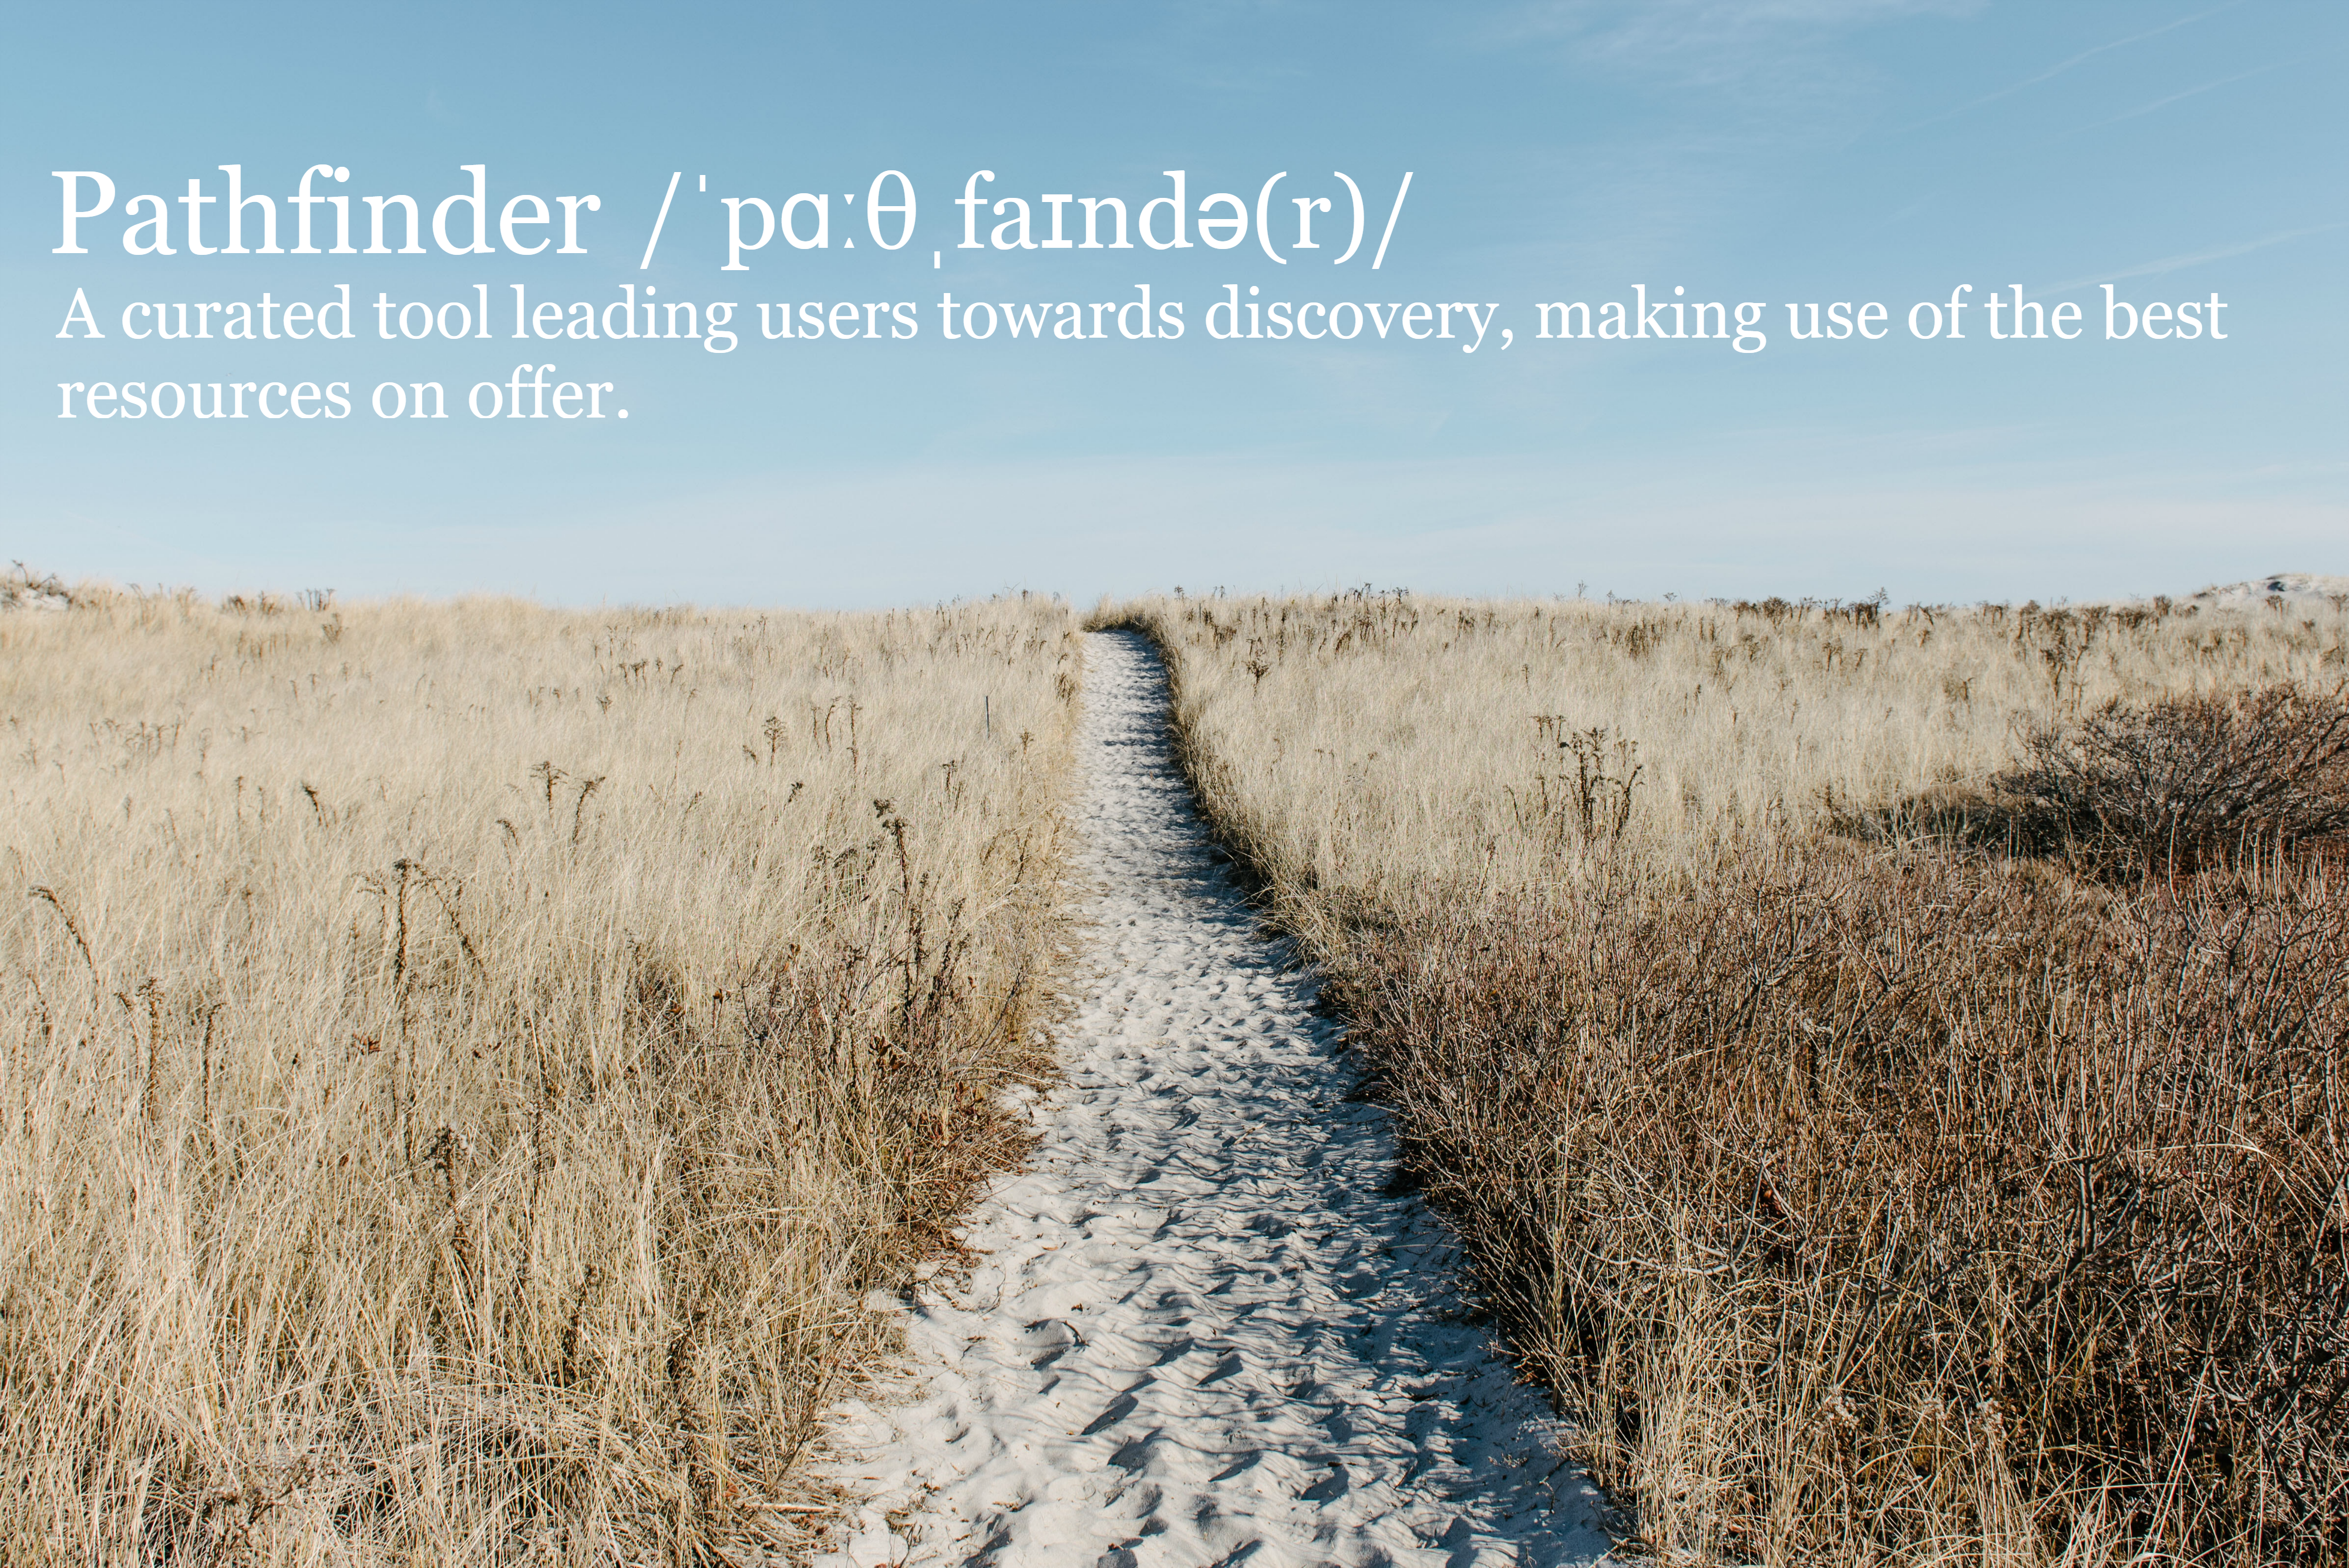 Image of a sandy path in a field. Words read Pathfinder, a curated tool leading users to discovery, making use of the best resources on offer.